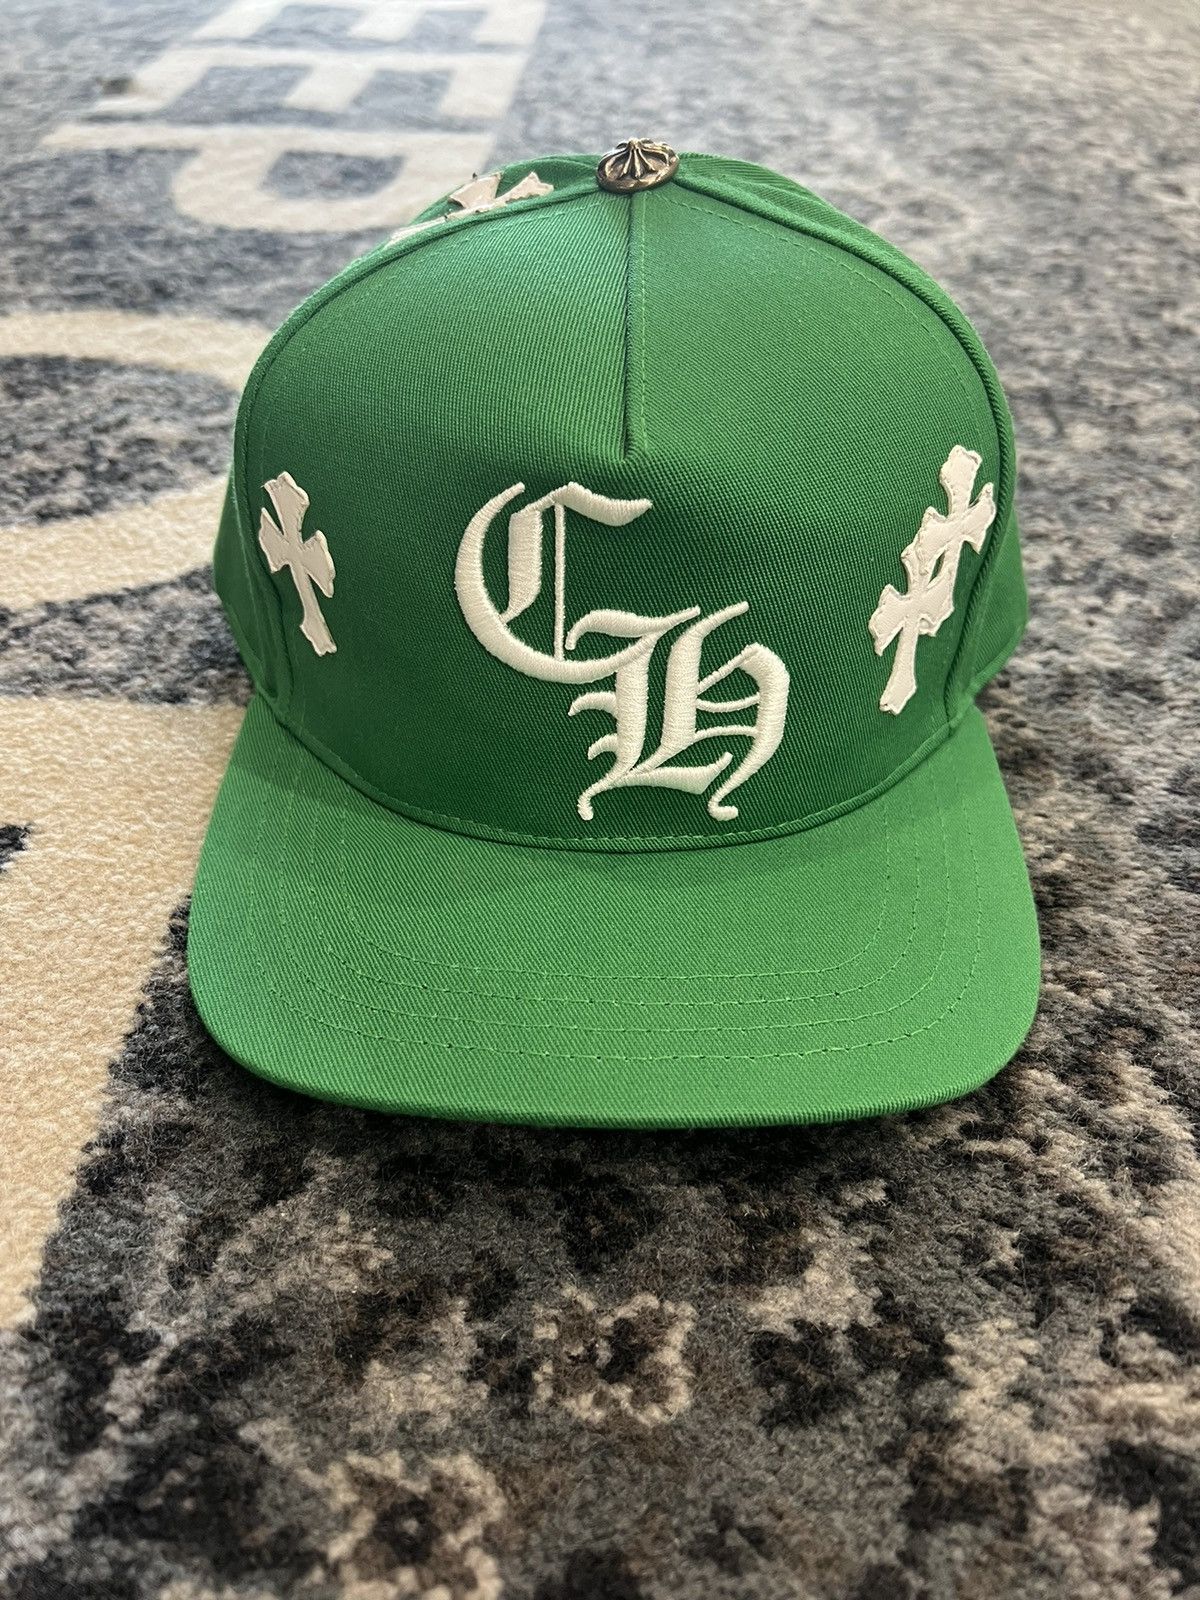 Chrome Hearts CHROME HEARTS “CROSS PATCH” HAT - (GREEN) | Grailed